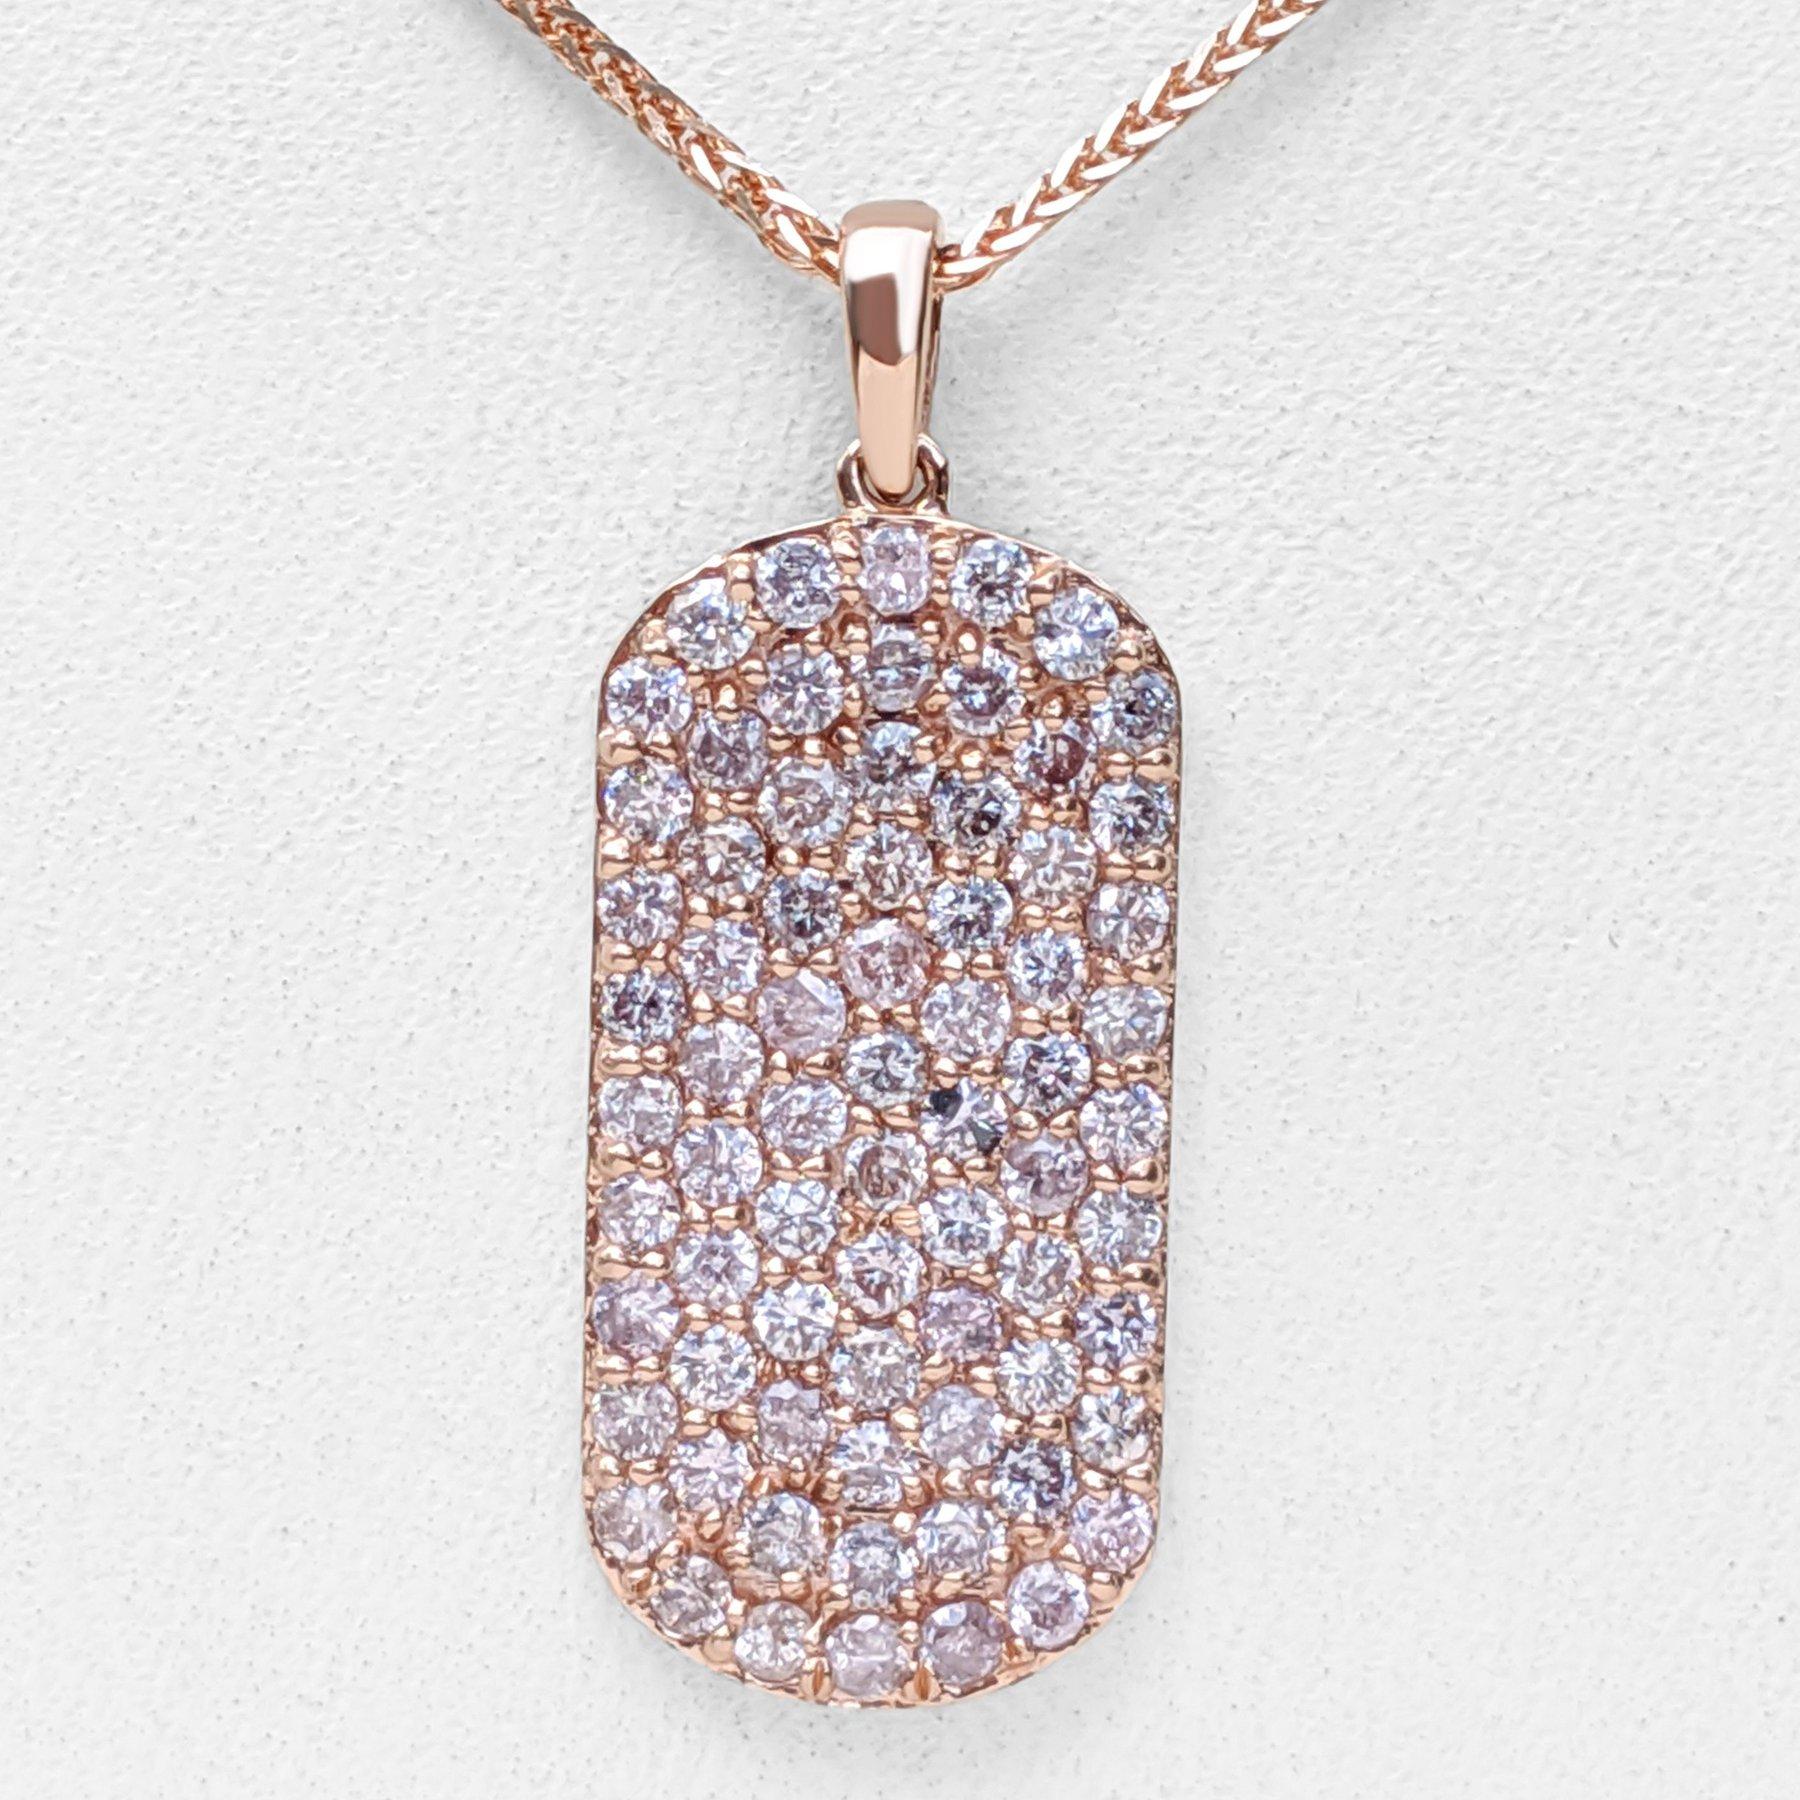 Center Stone:
___________
Natural Diamond
Cut: Round Brilliant
Carat: 1.10 carat
Color: Light Pink
Clarity: VS-SI

Necklace Length Range: 42-45 cm

VAT and TAXES:
Please be aware that your country of residence may impose customs and import